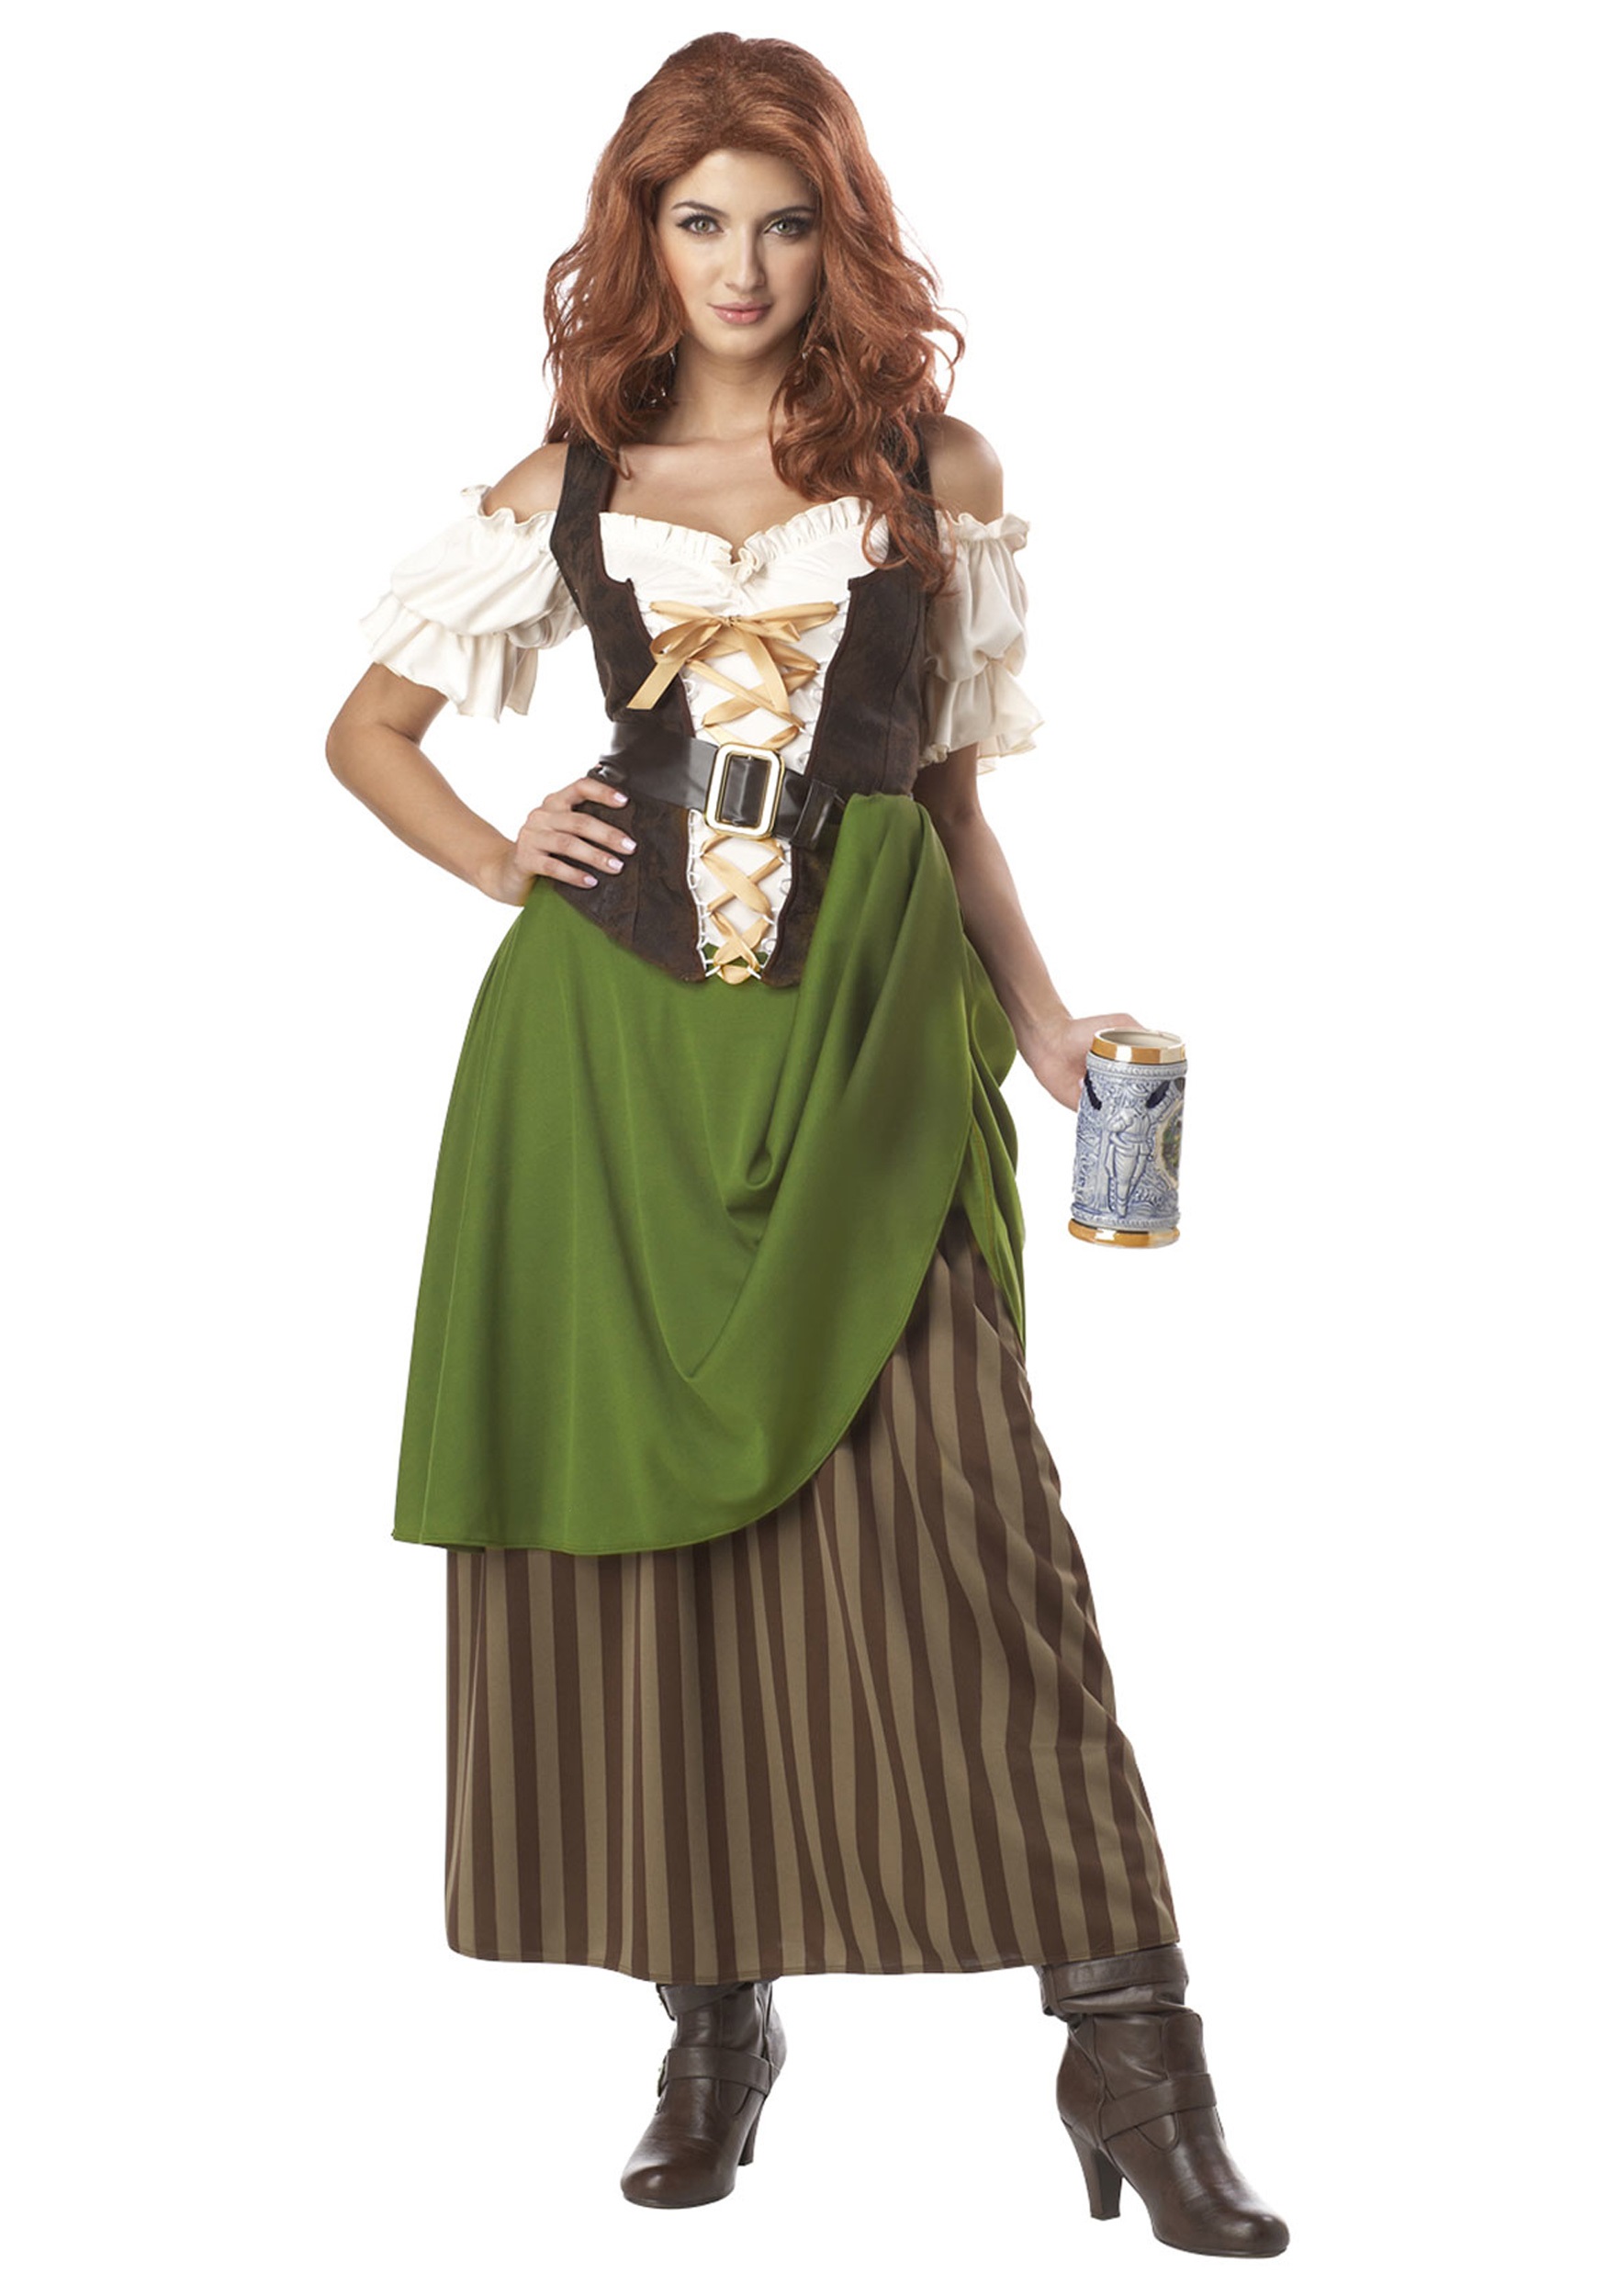 Photos - Fancy Dress California Costume Collection Tavern Maiden Costume for Women Brown/Gr